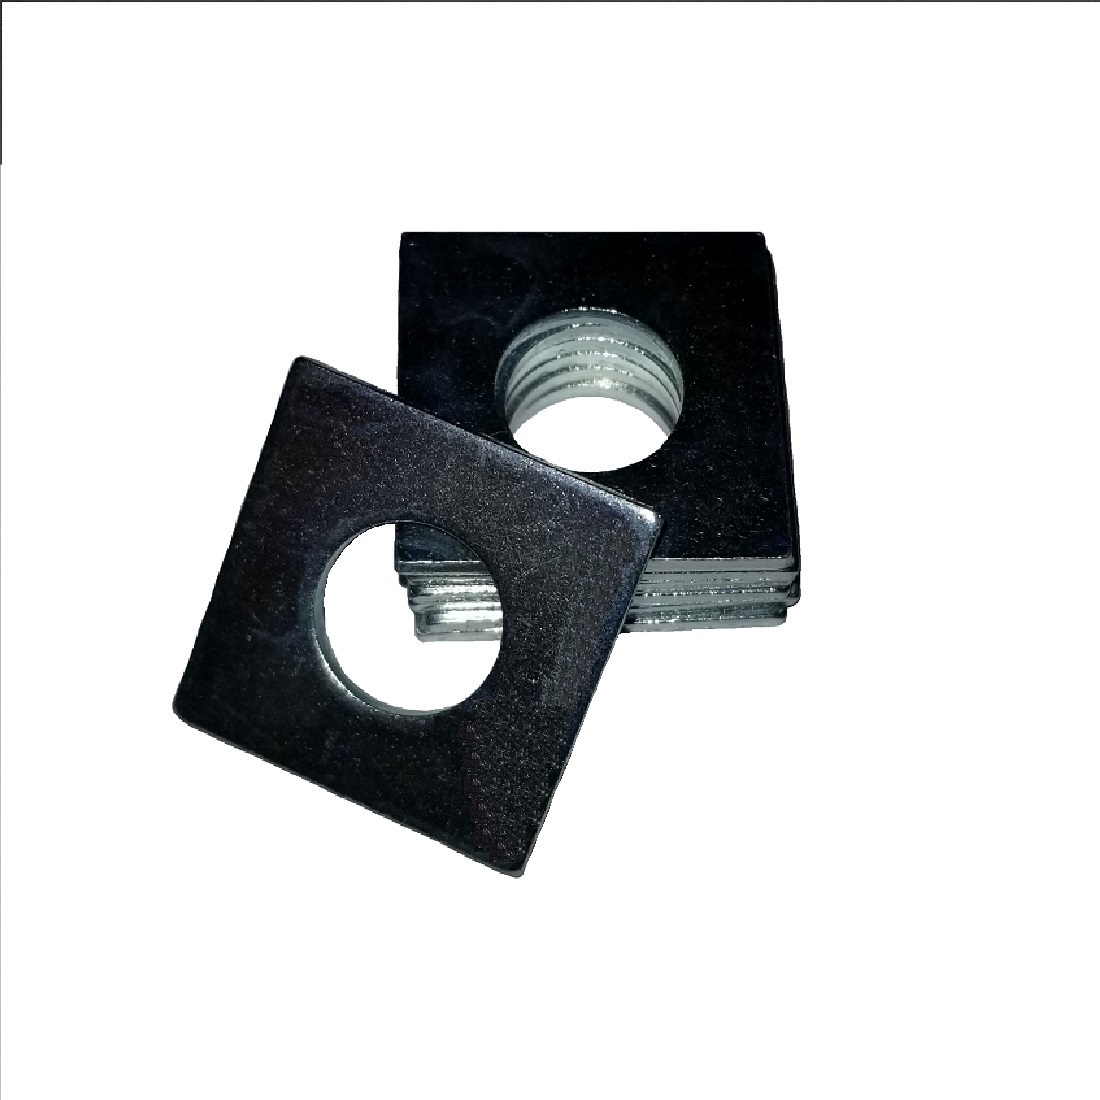 Square OD Washer - 0.687 ID, 2.000 OD, 0.250 Thick, Spring Steel - Soft, Zinc & Clear